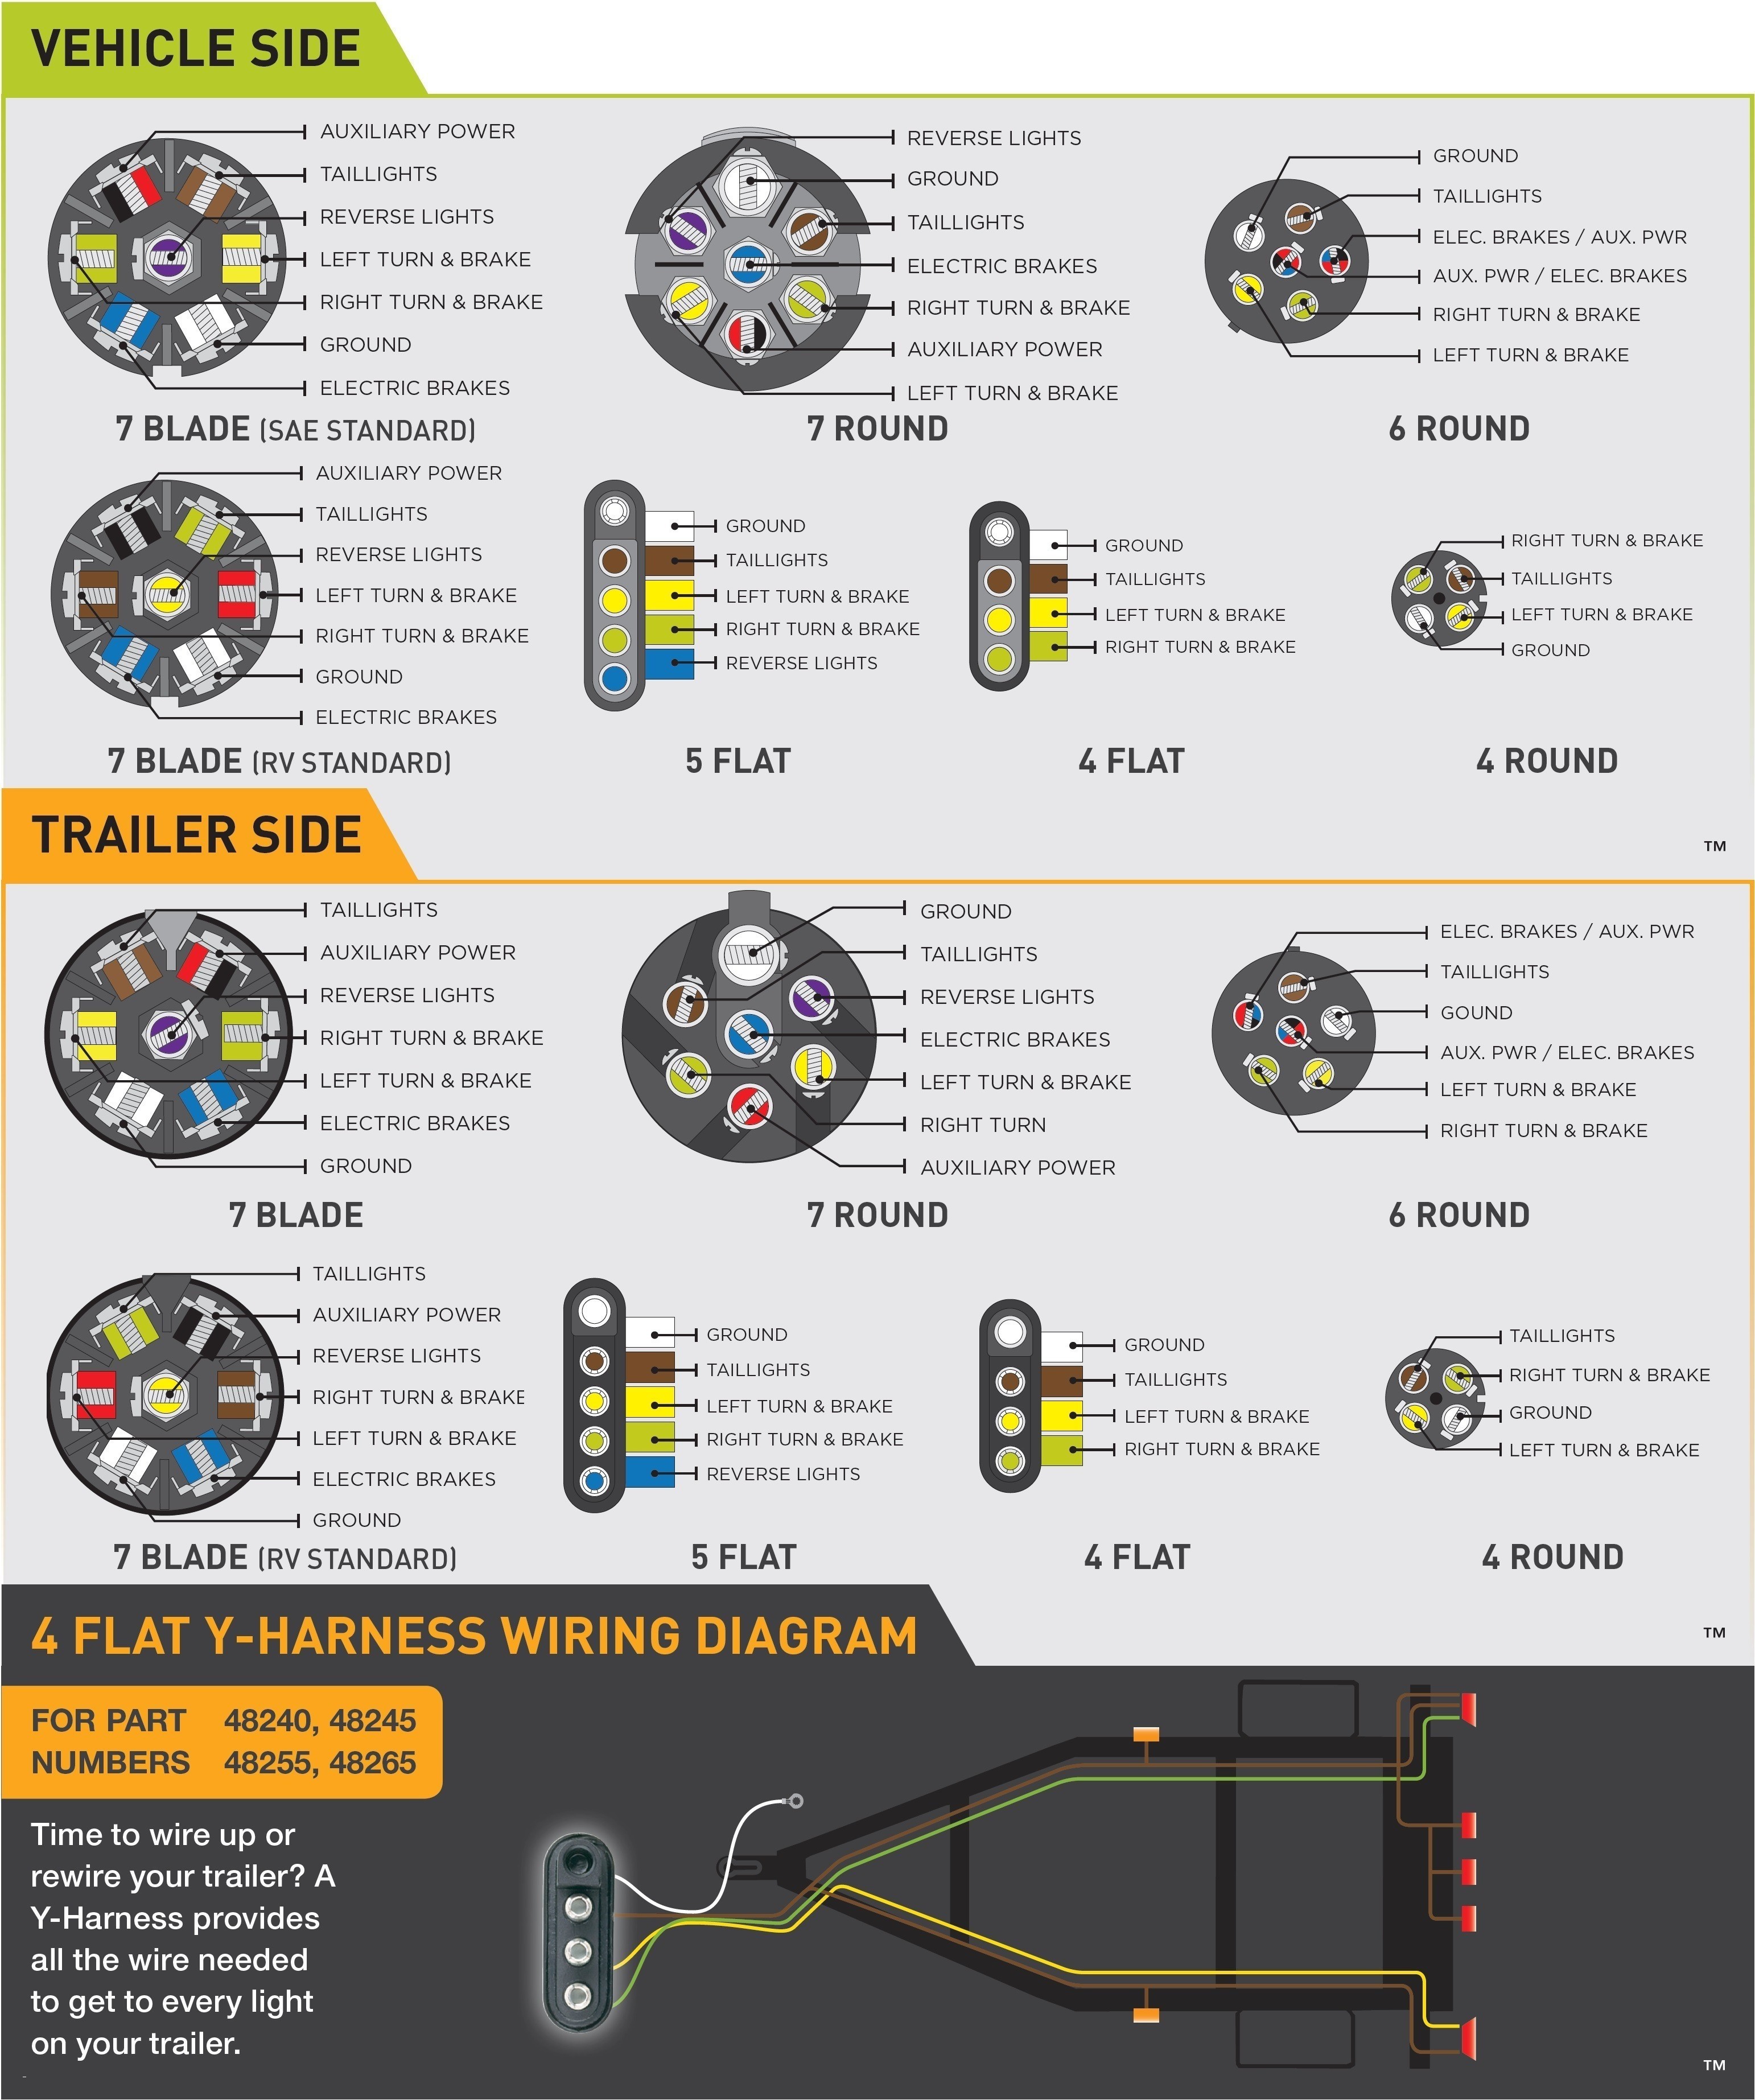 Trailer Lights Wiring Diagram 7 Pin Refrence Wiring Diagram for Trailer Lights 7 Pin Of Trailer Lights Wiring Diagram 7 Pin